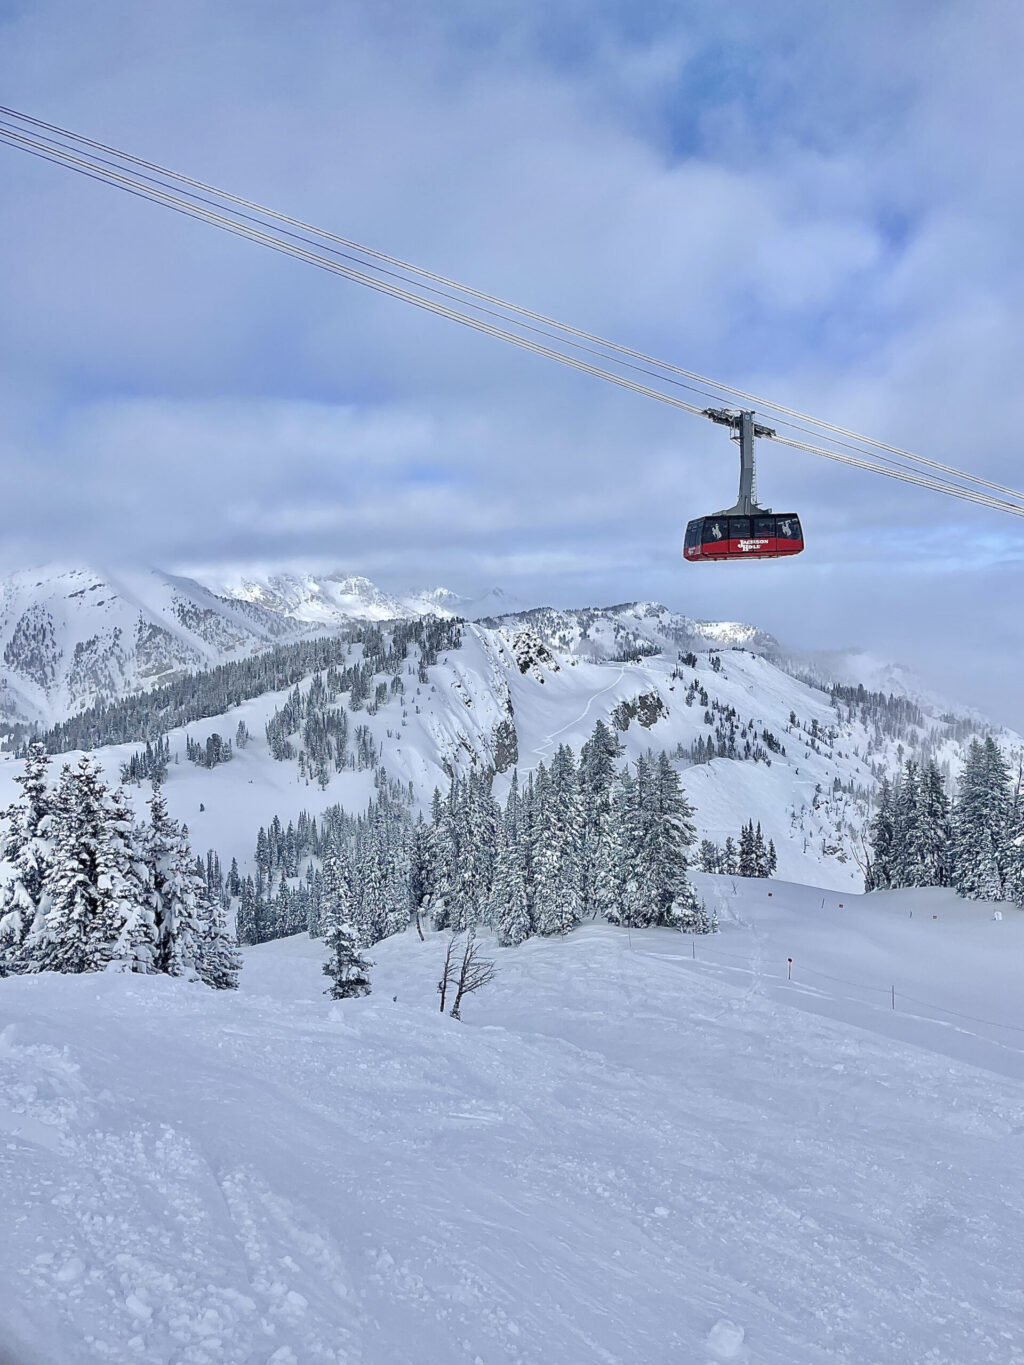 Above snowy mountains, a cable car glides, presenting a breathtaking and wondrous scenic panorama.